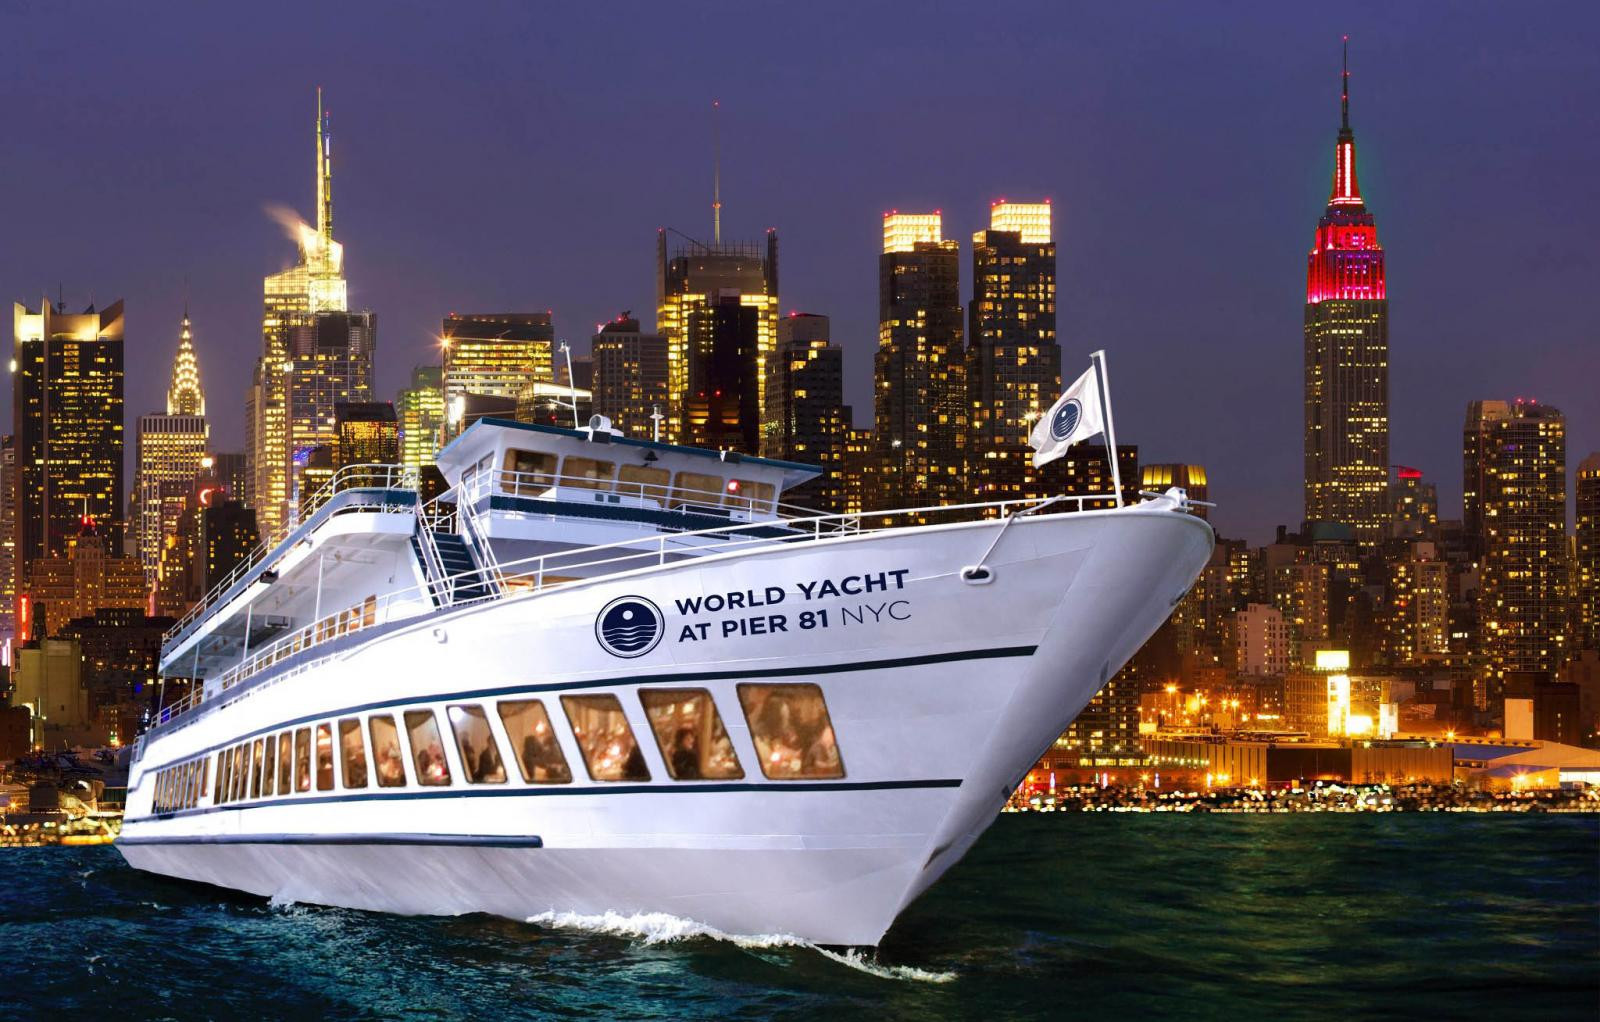 The Best Dinner Boat Cruise Nyc